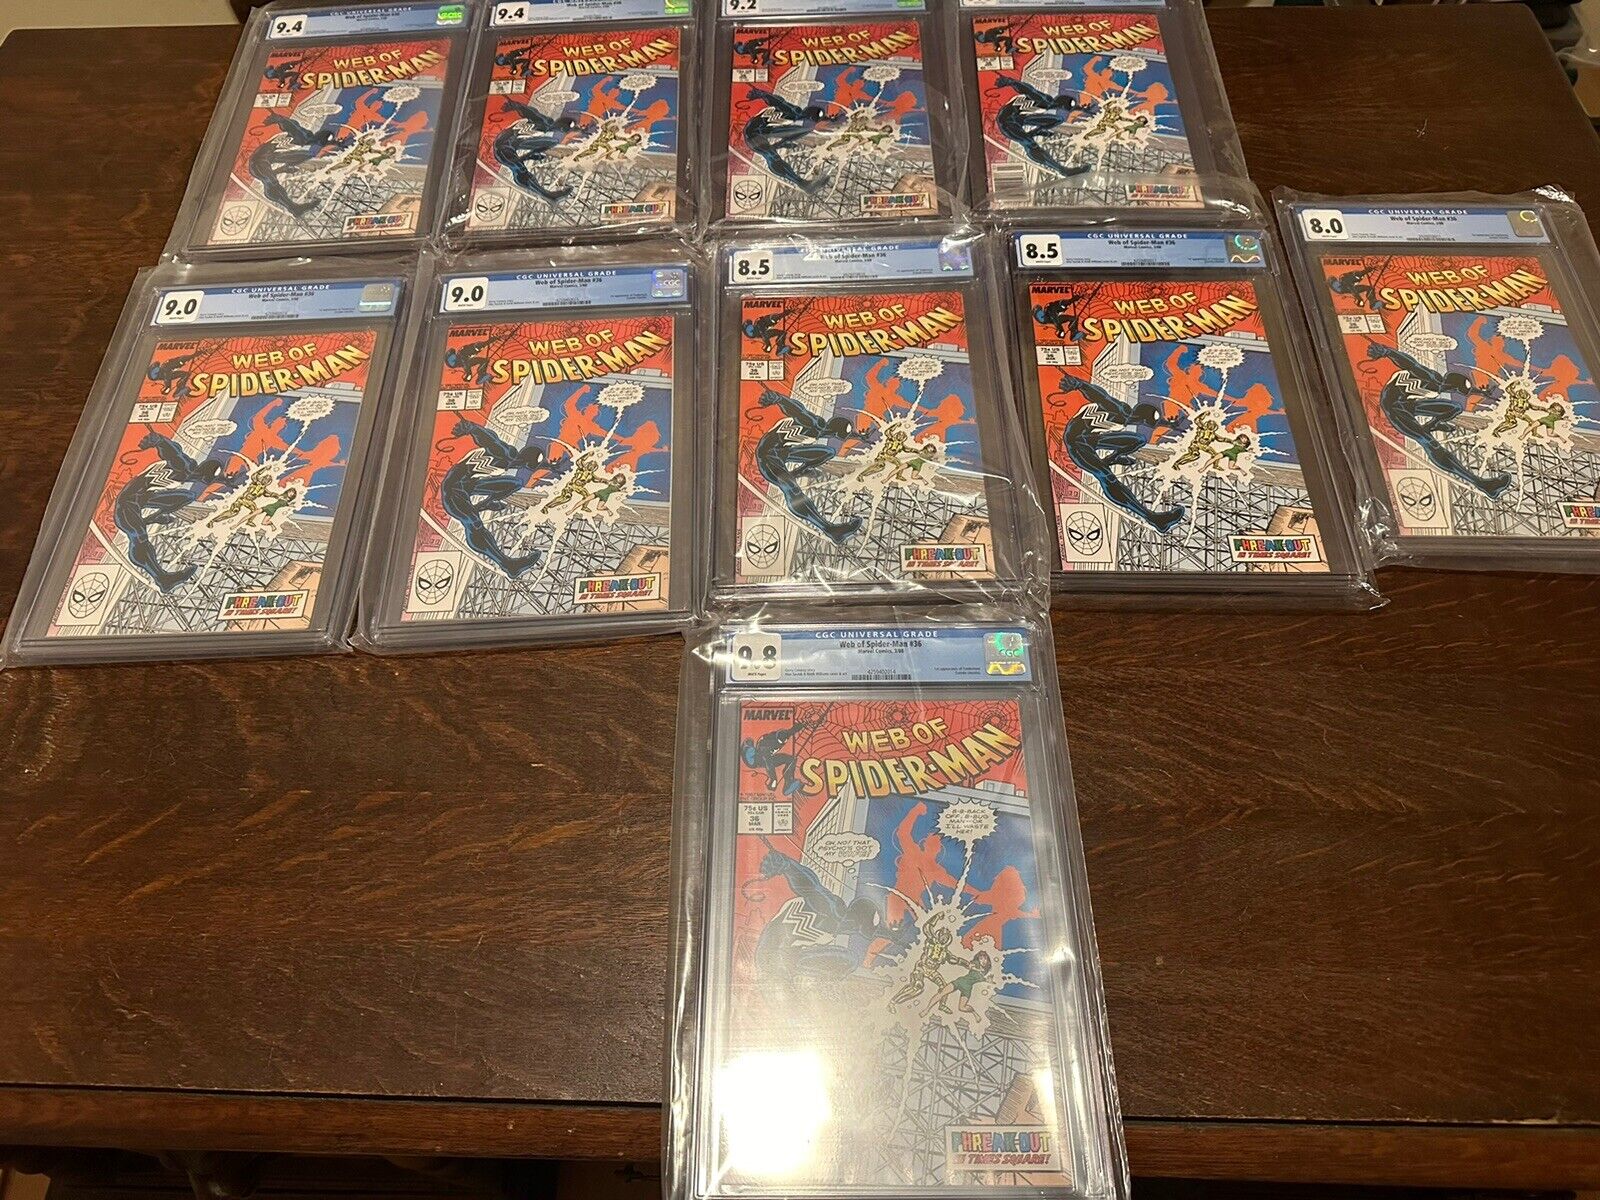 Web of Spider-Man 36 CGC 9.8 (White Pages TOMBSTONE 3/88) + 9.4,9.2,9.0,8.5,8.0